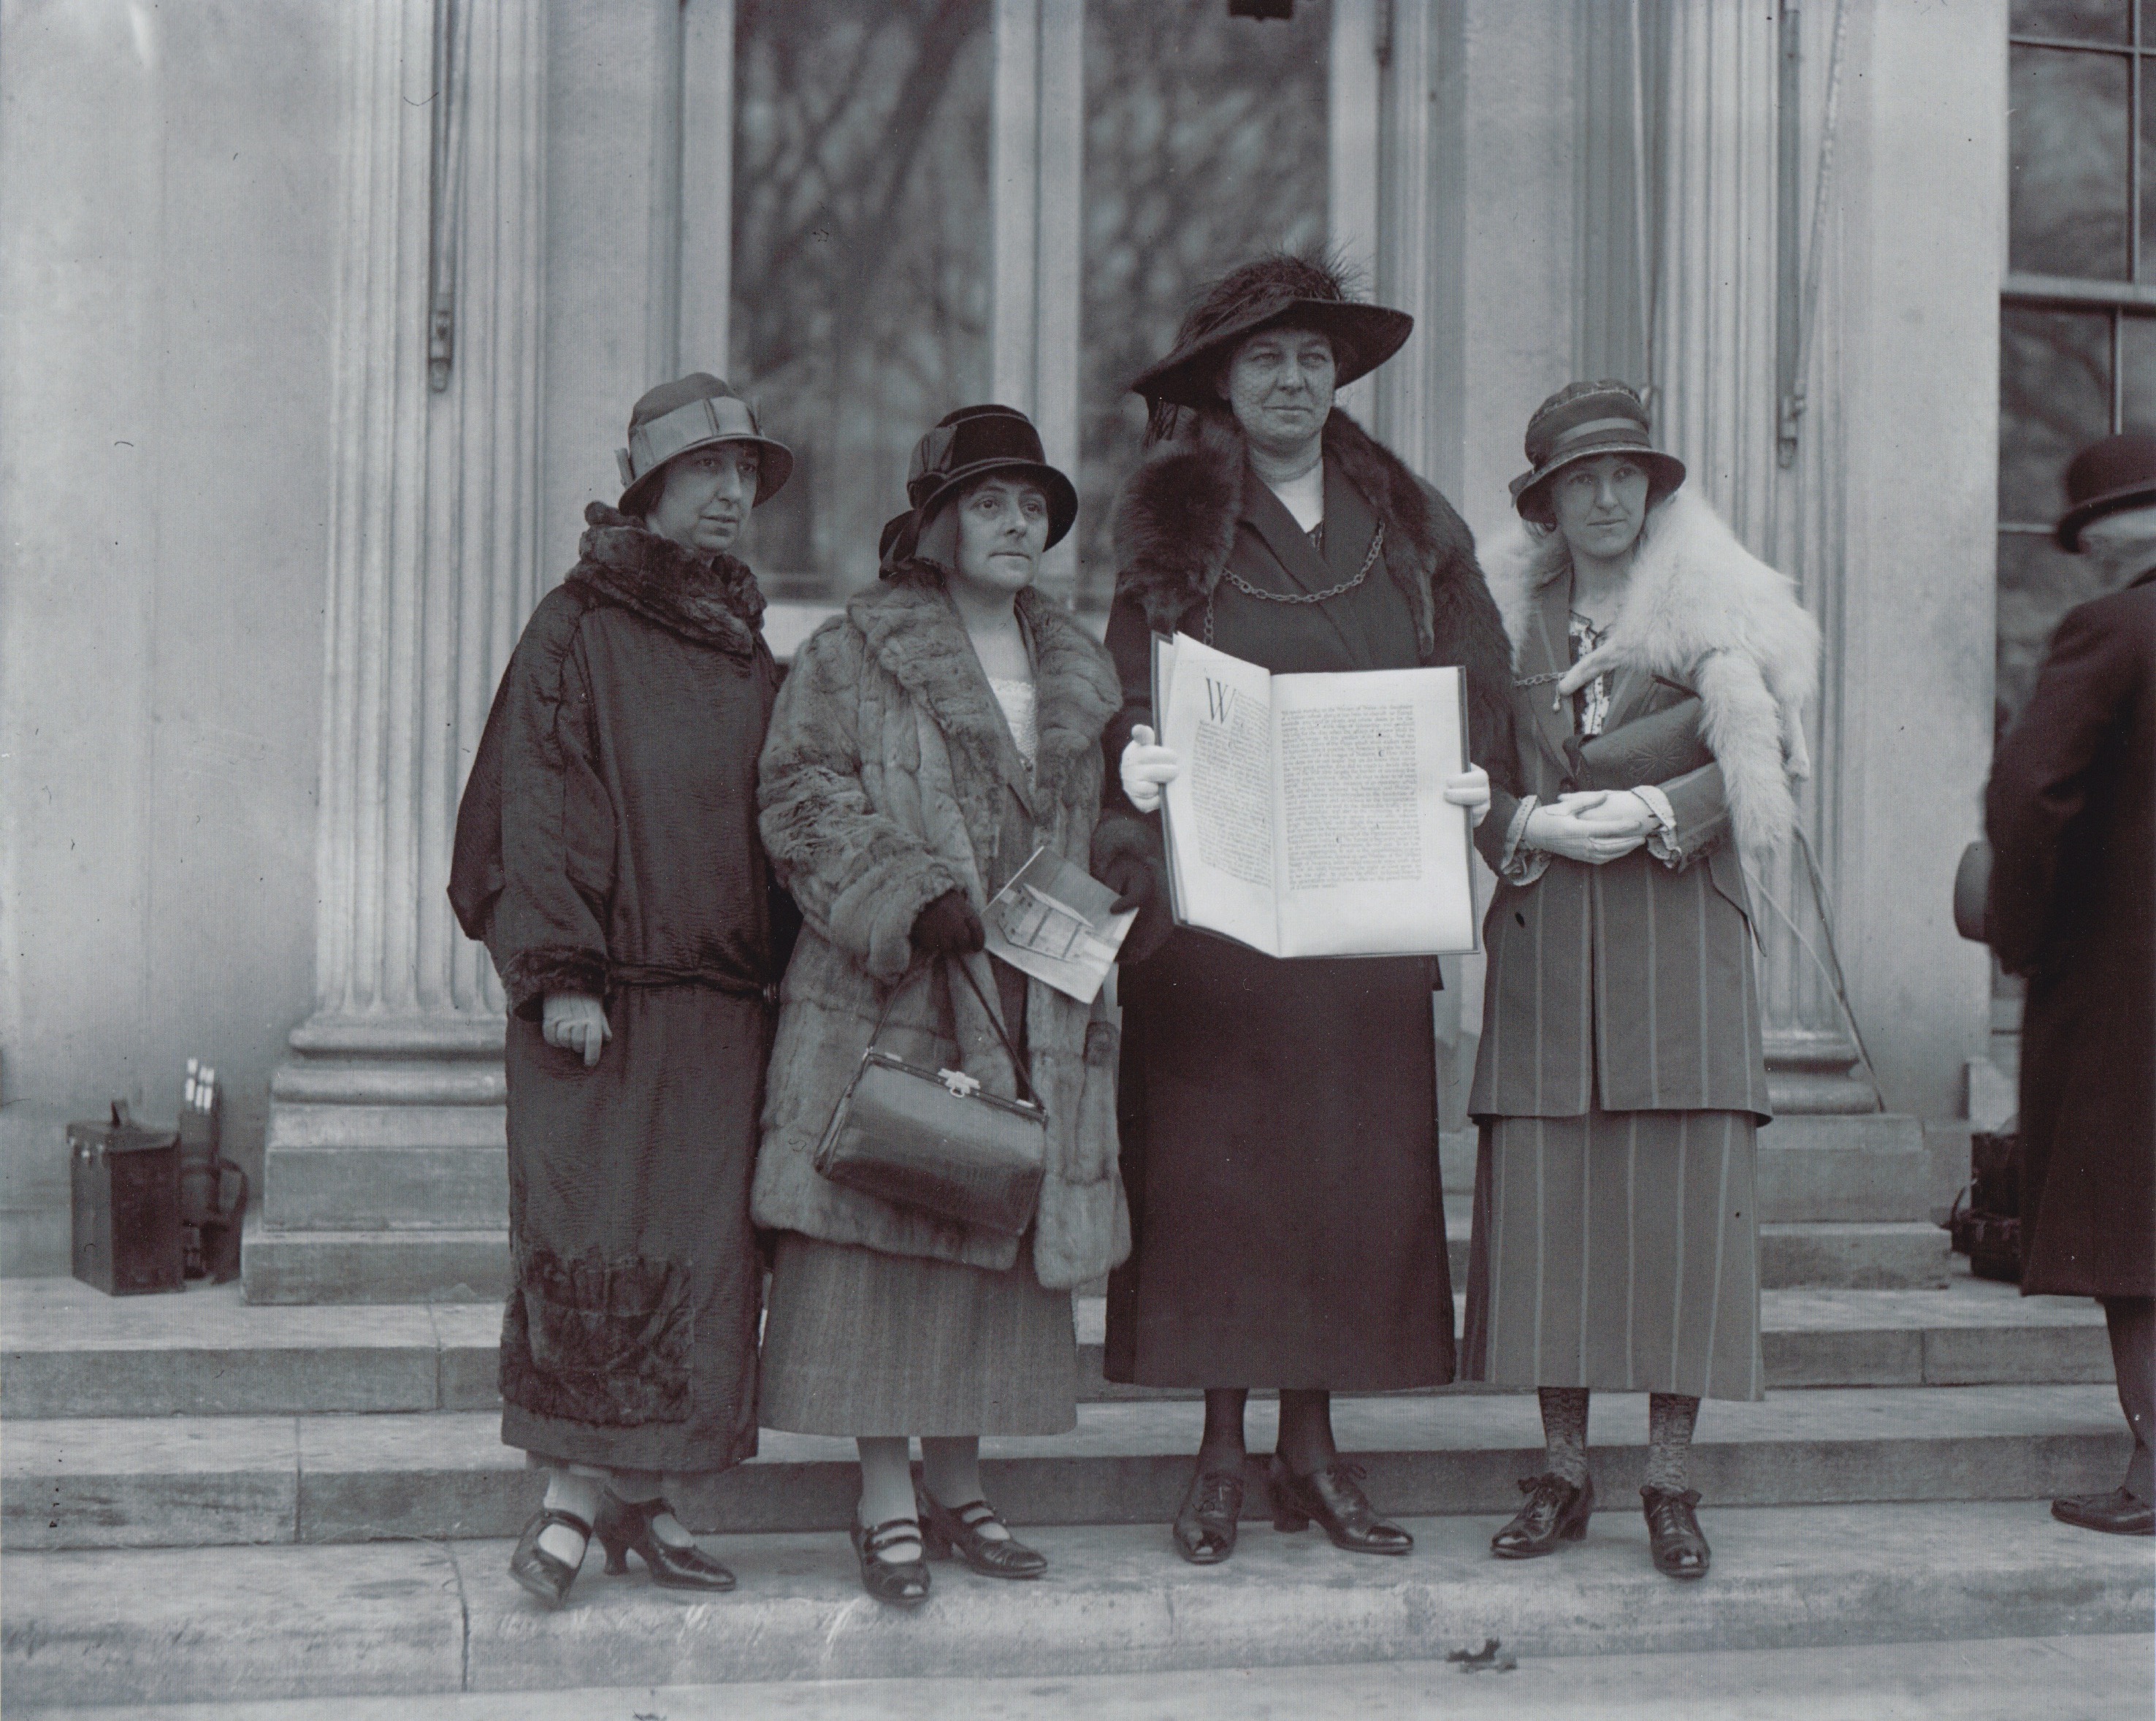 The delegation of women who took the historic peace petition to the United States of America in 1924 was led by Annie Hughes-Griffiths who is pictured holding the appeal on the steps of the White House in Washington DC with (L-R) Gladys Thomas, Mary Ellis and Elined Prys). Photo credit: Welsh Centre for International Affairs.